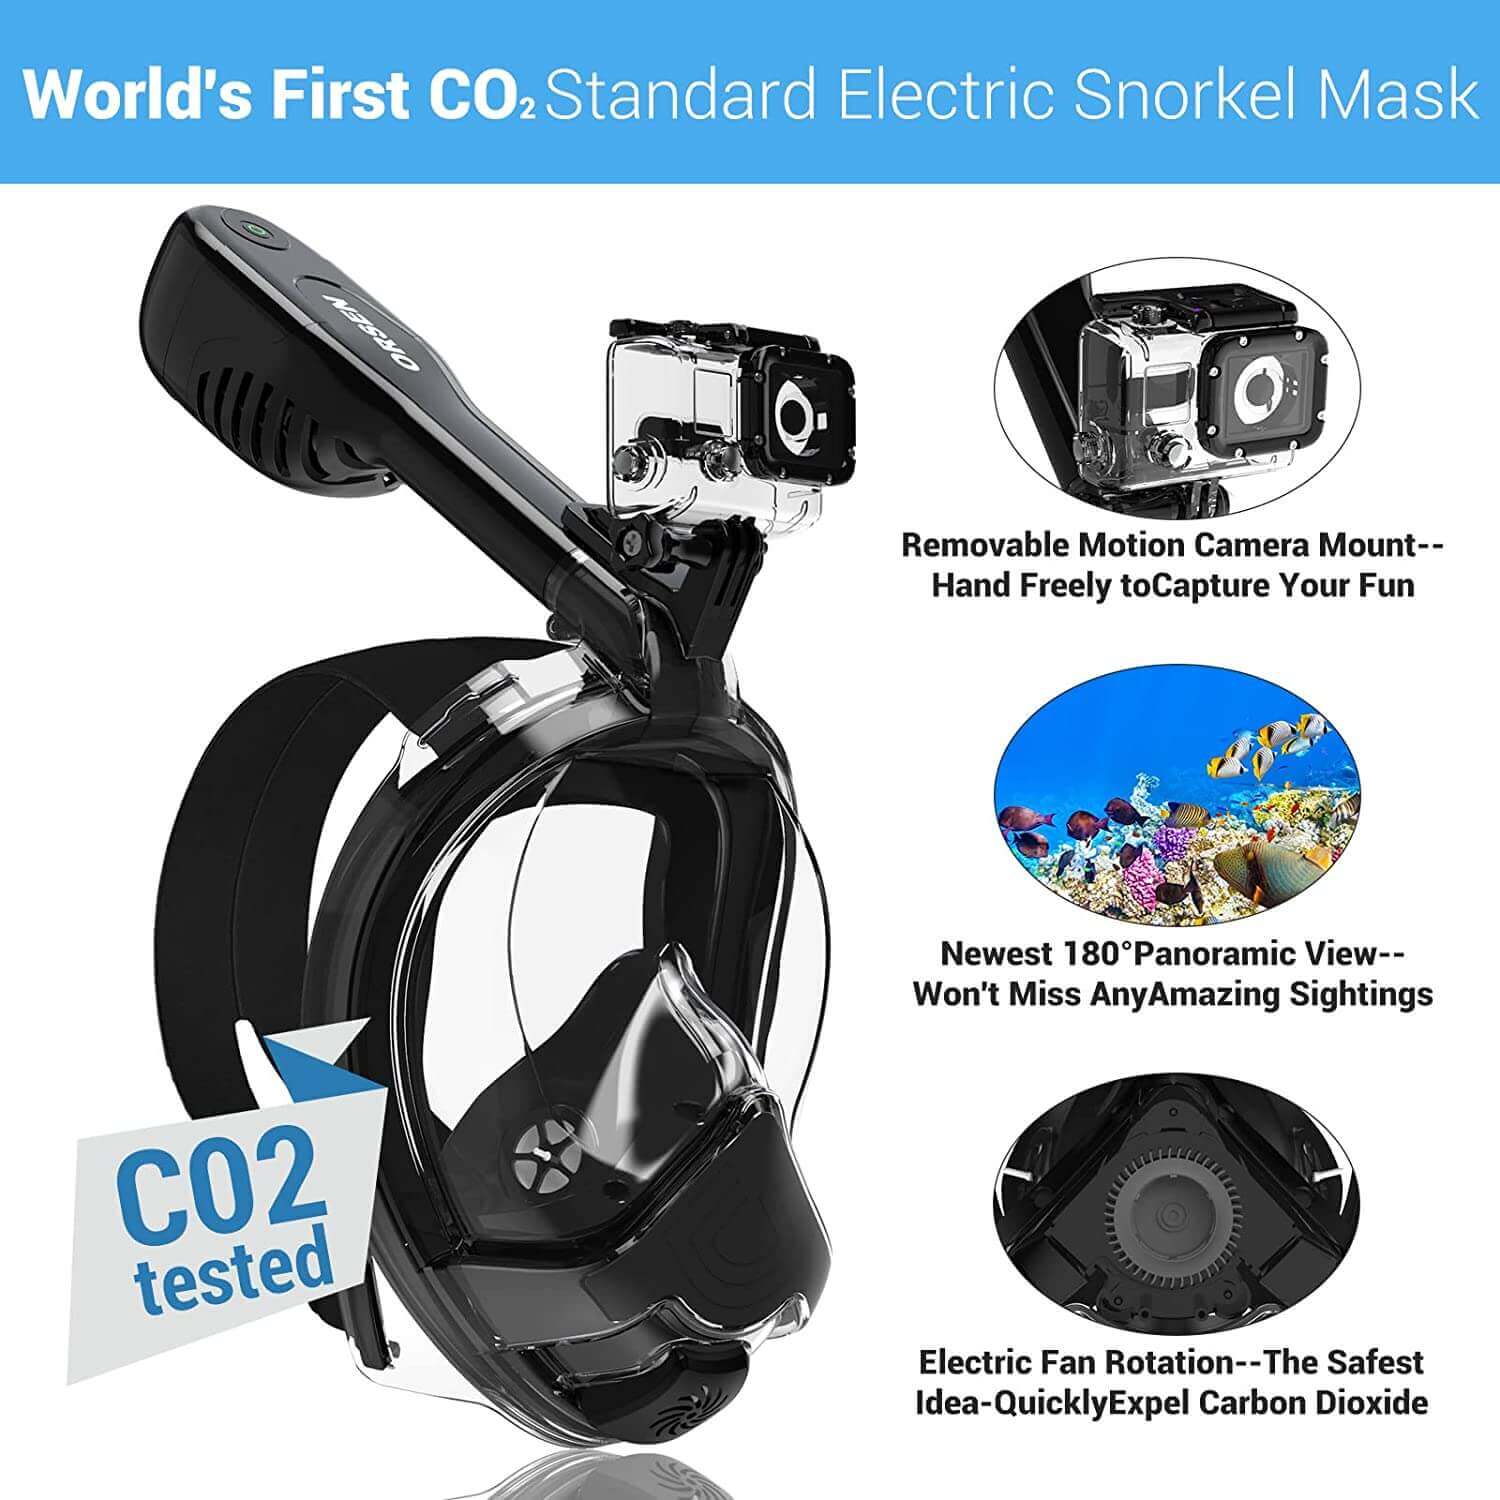 Orsen Electric Full Face Snorkeling Mask - World's First CO₂ Standard